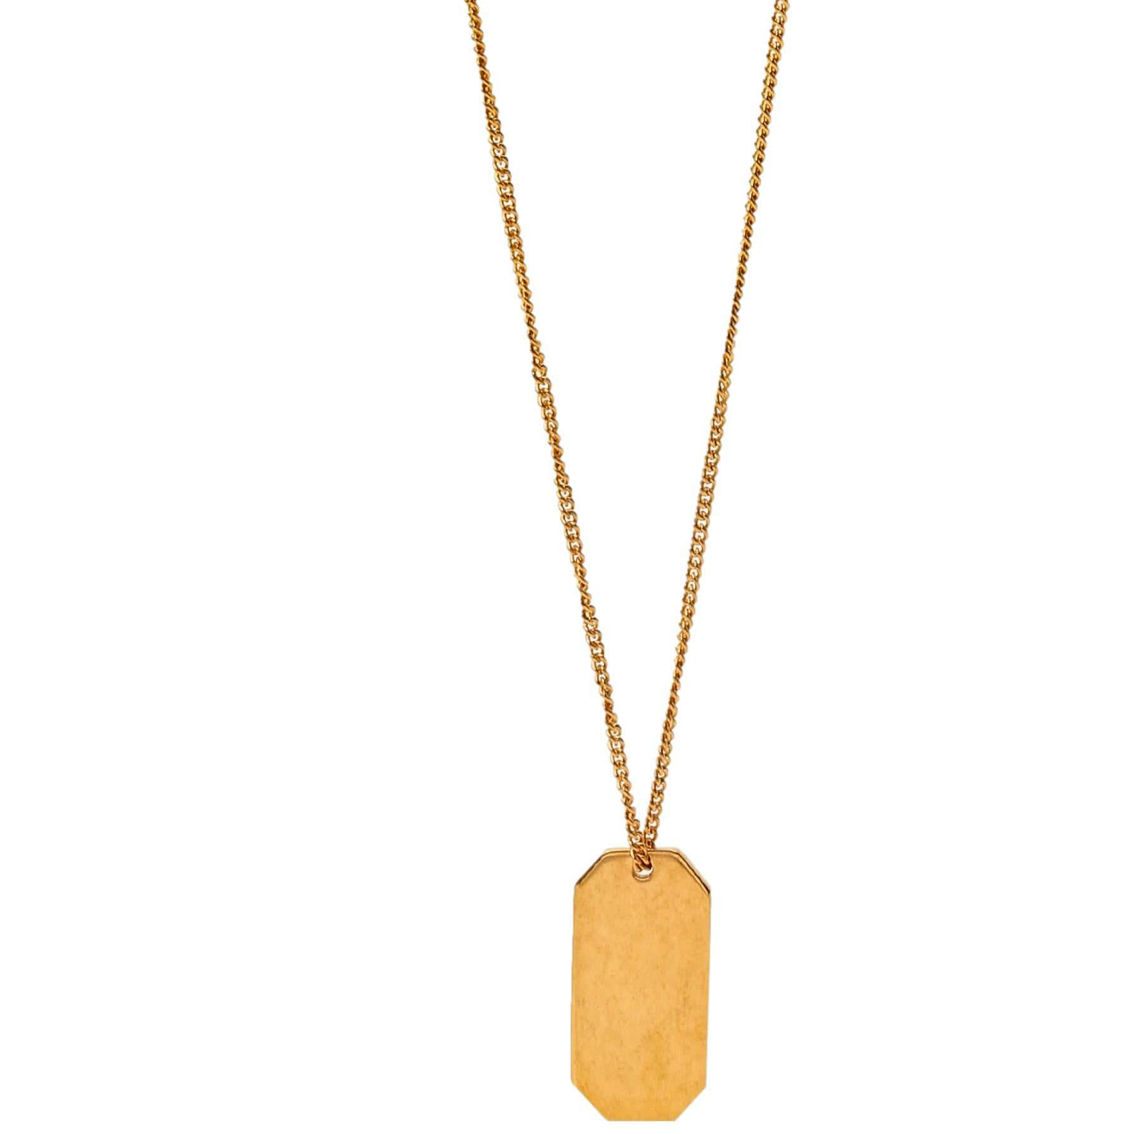 Saint Laurent Military Tag Pendant Necklace Brass Gold (New) - Image 2 of 4